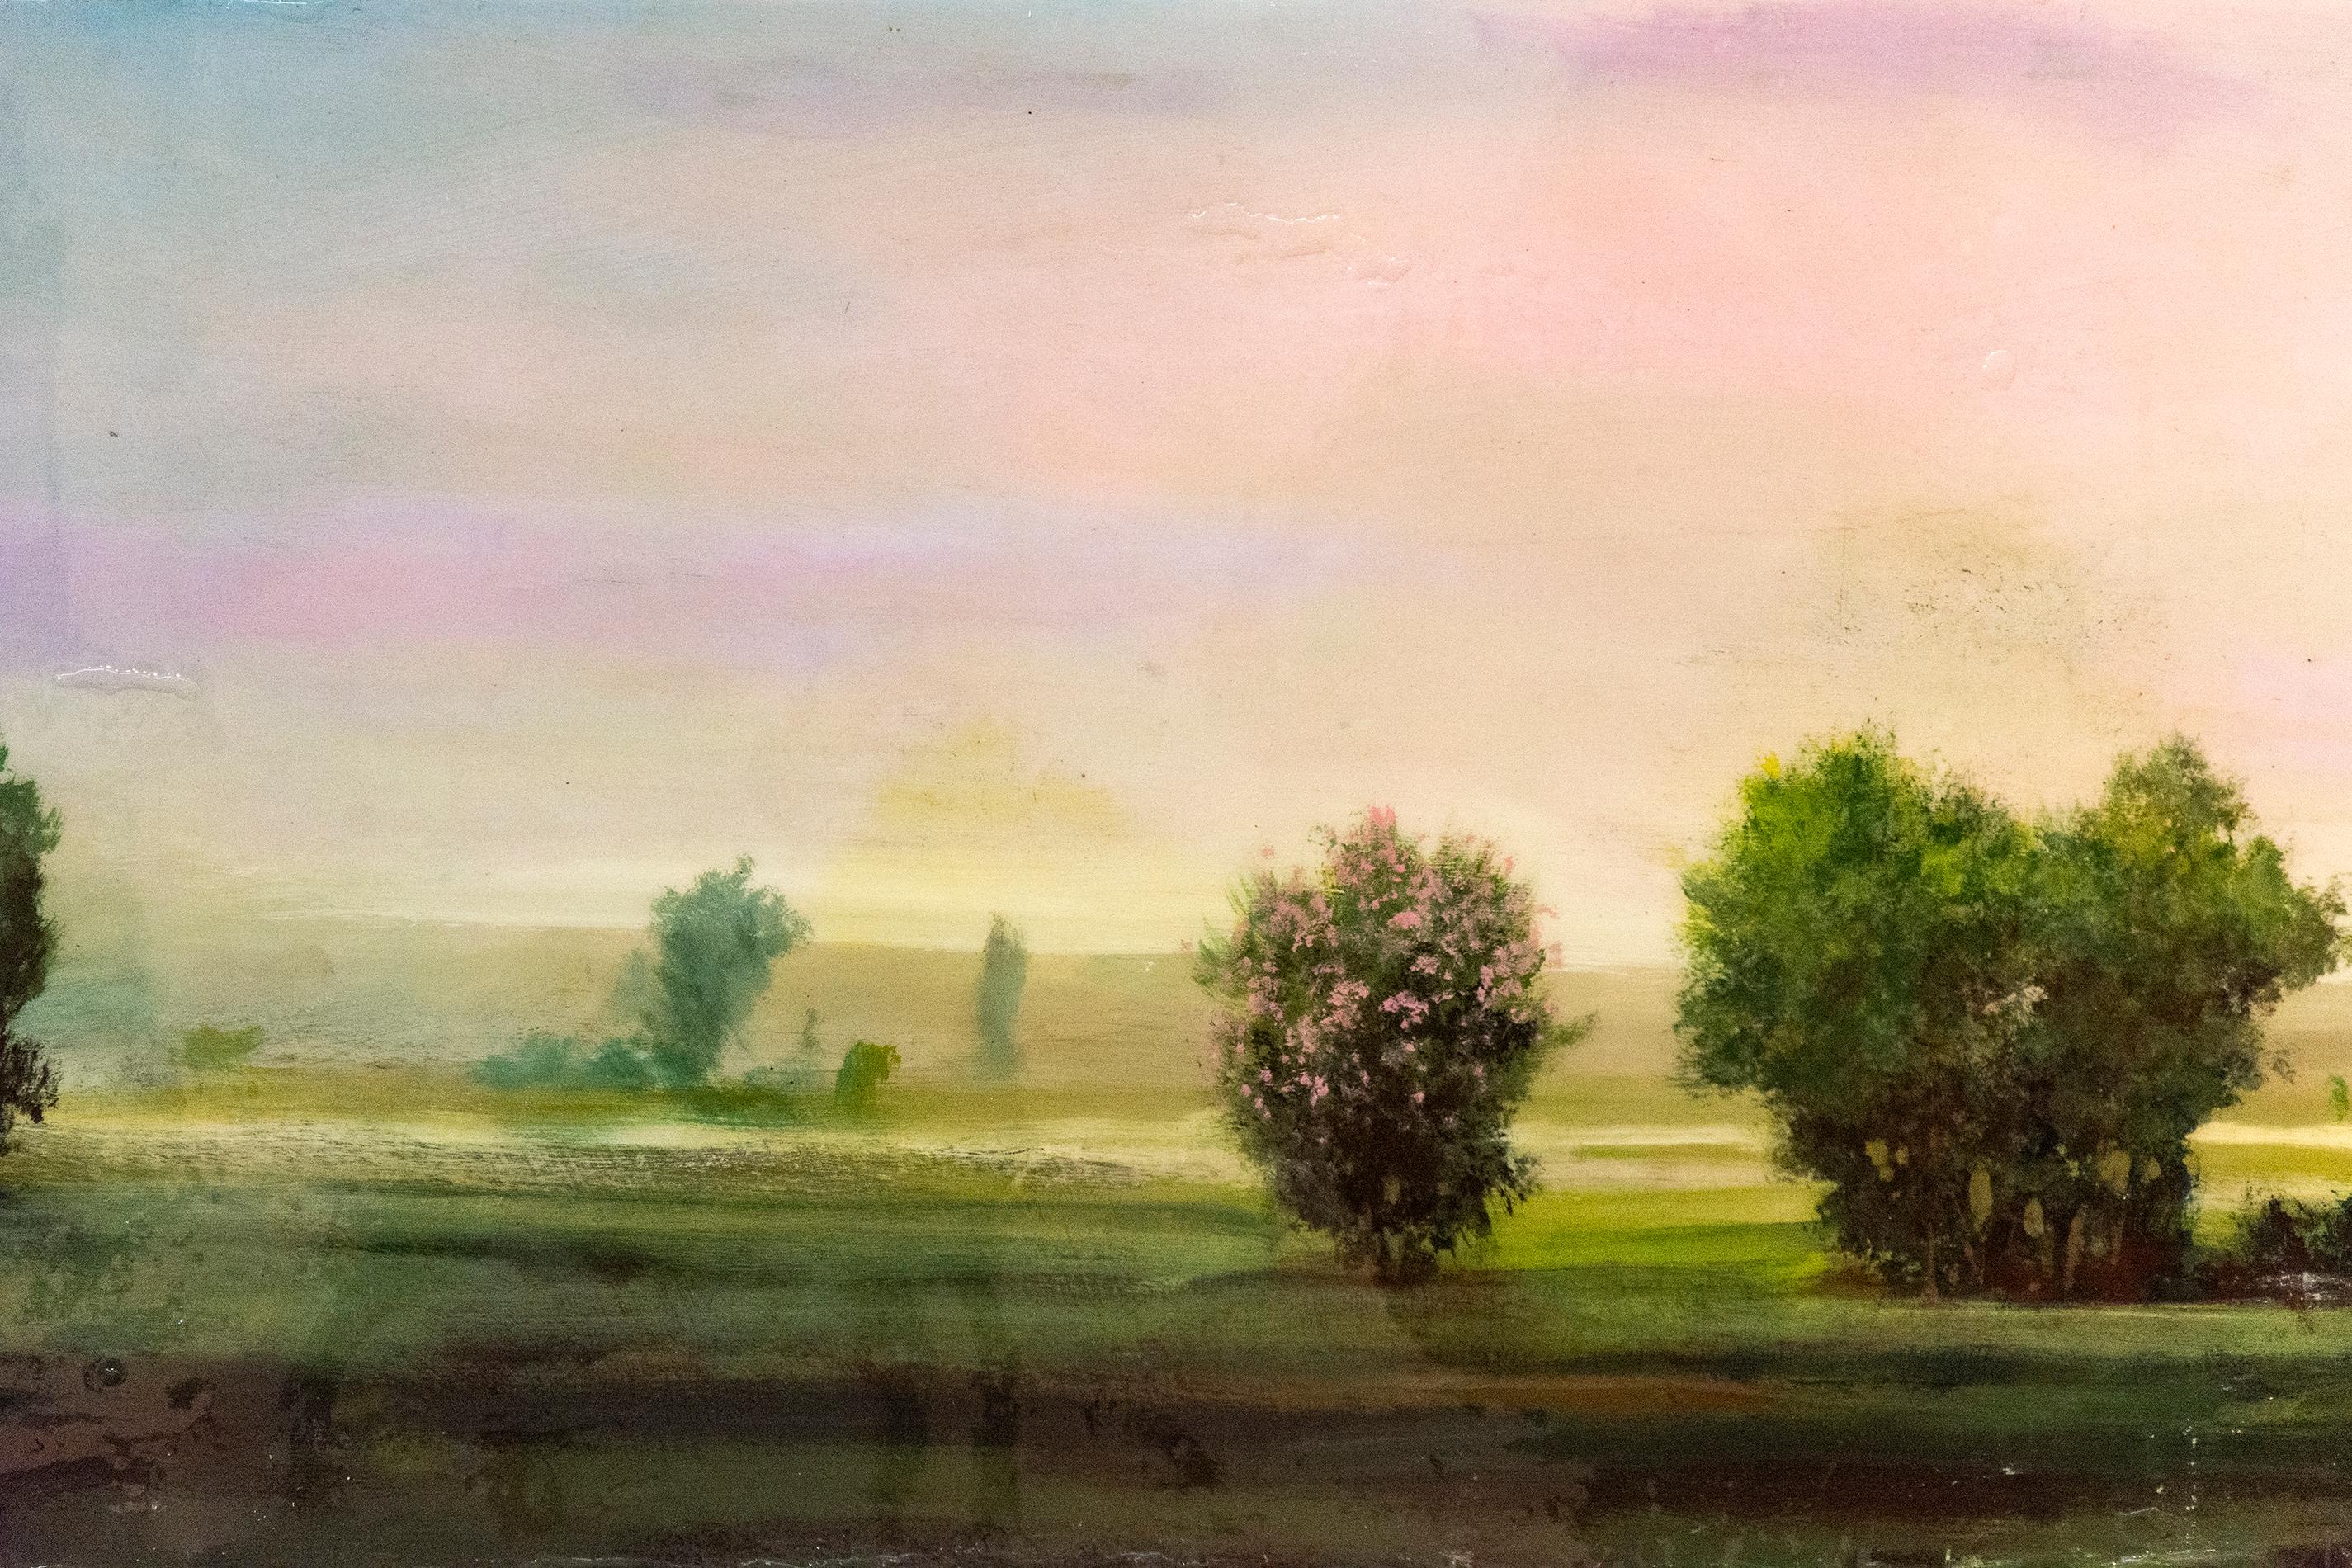 Peter Hoffer’s landscapes are ethereal, exquisite and masterful. The Canadian artist’s work has often been compared to the paintings rendered by the famed British artist, John Constable. This horizontal view of a pastoral countryside setting has his